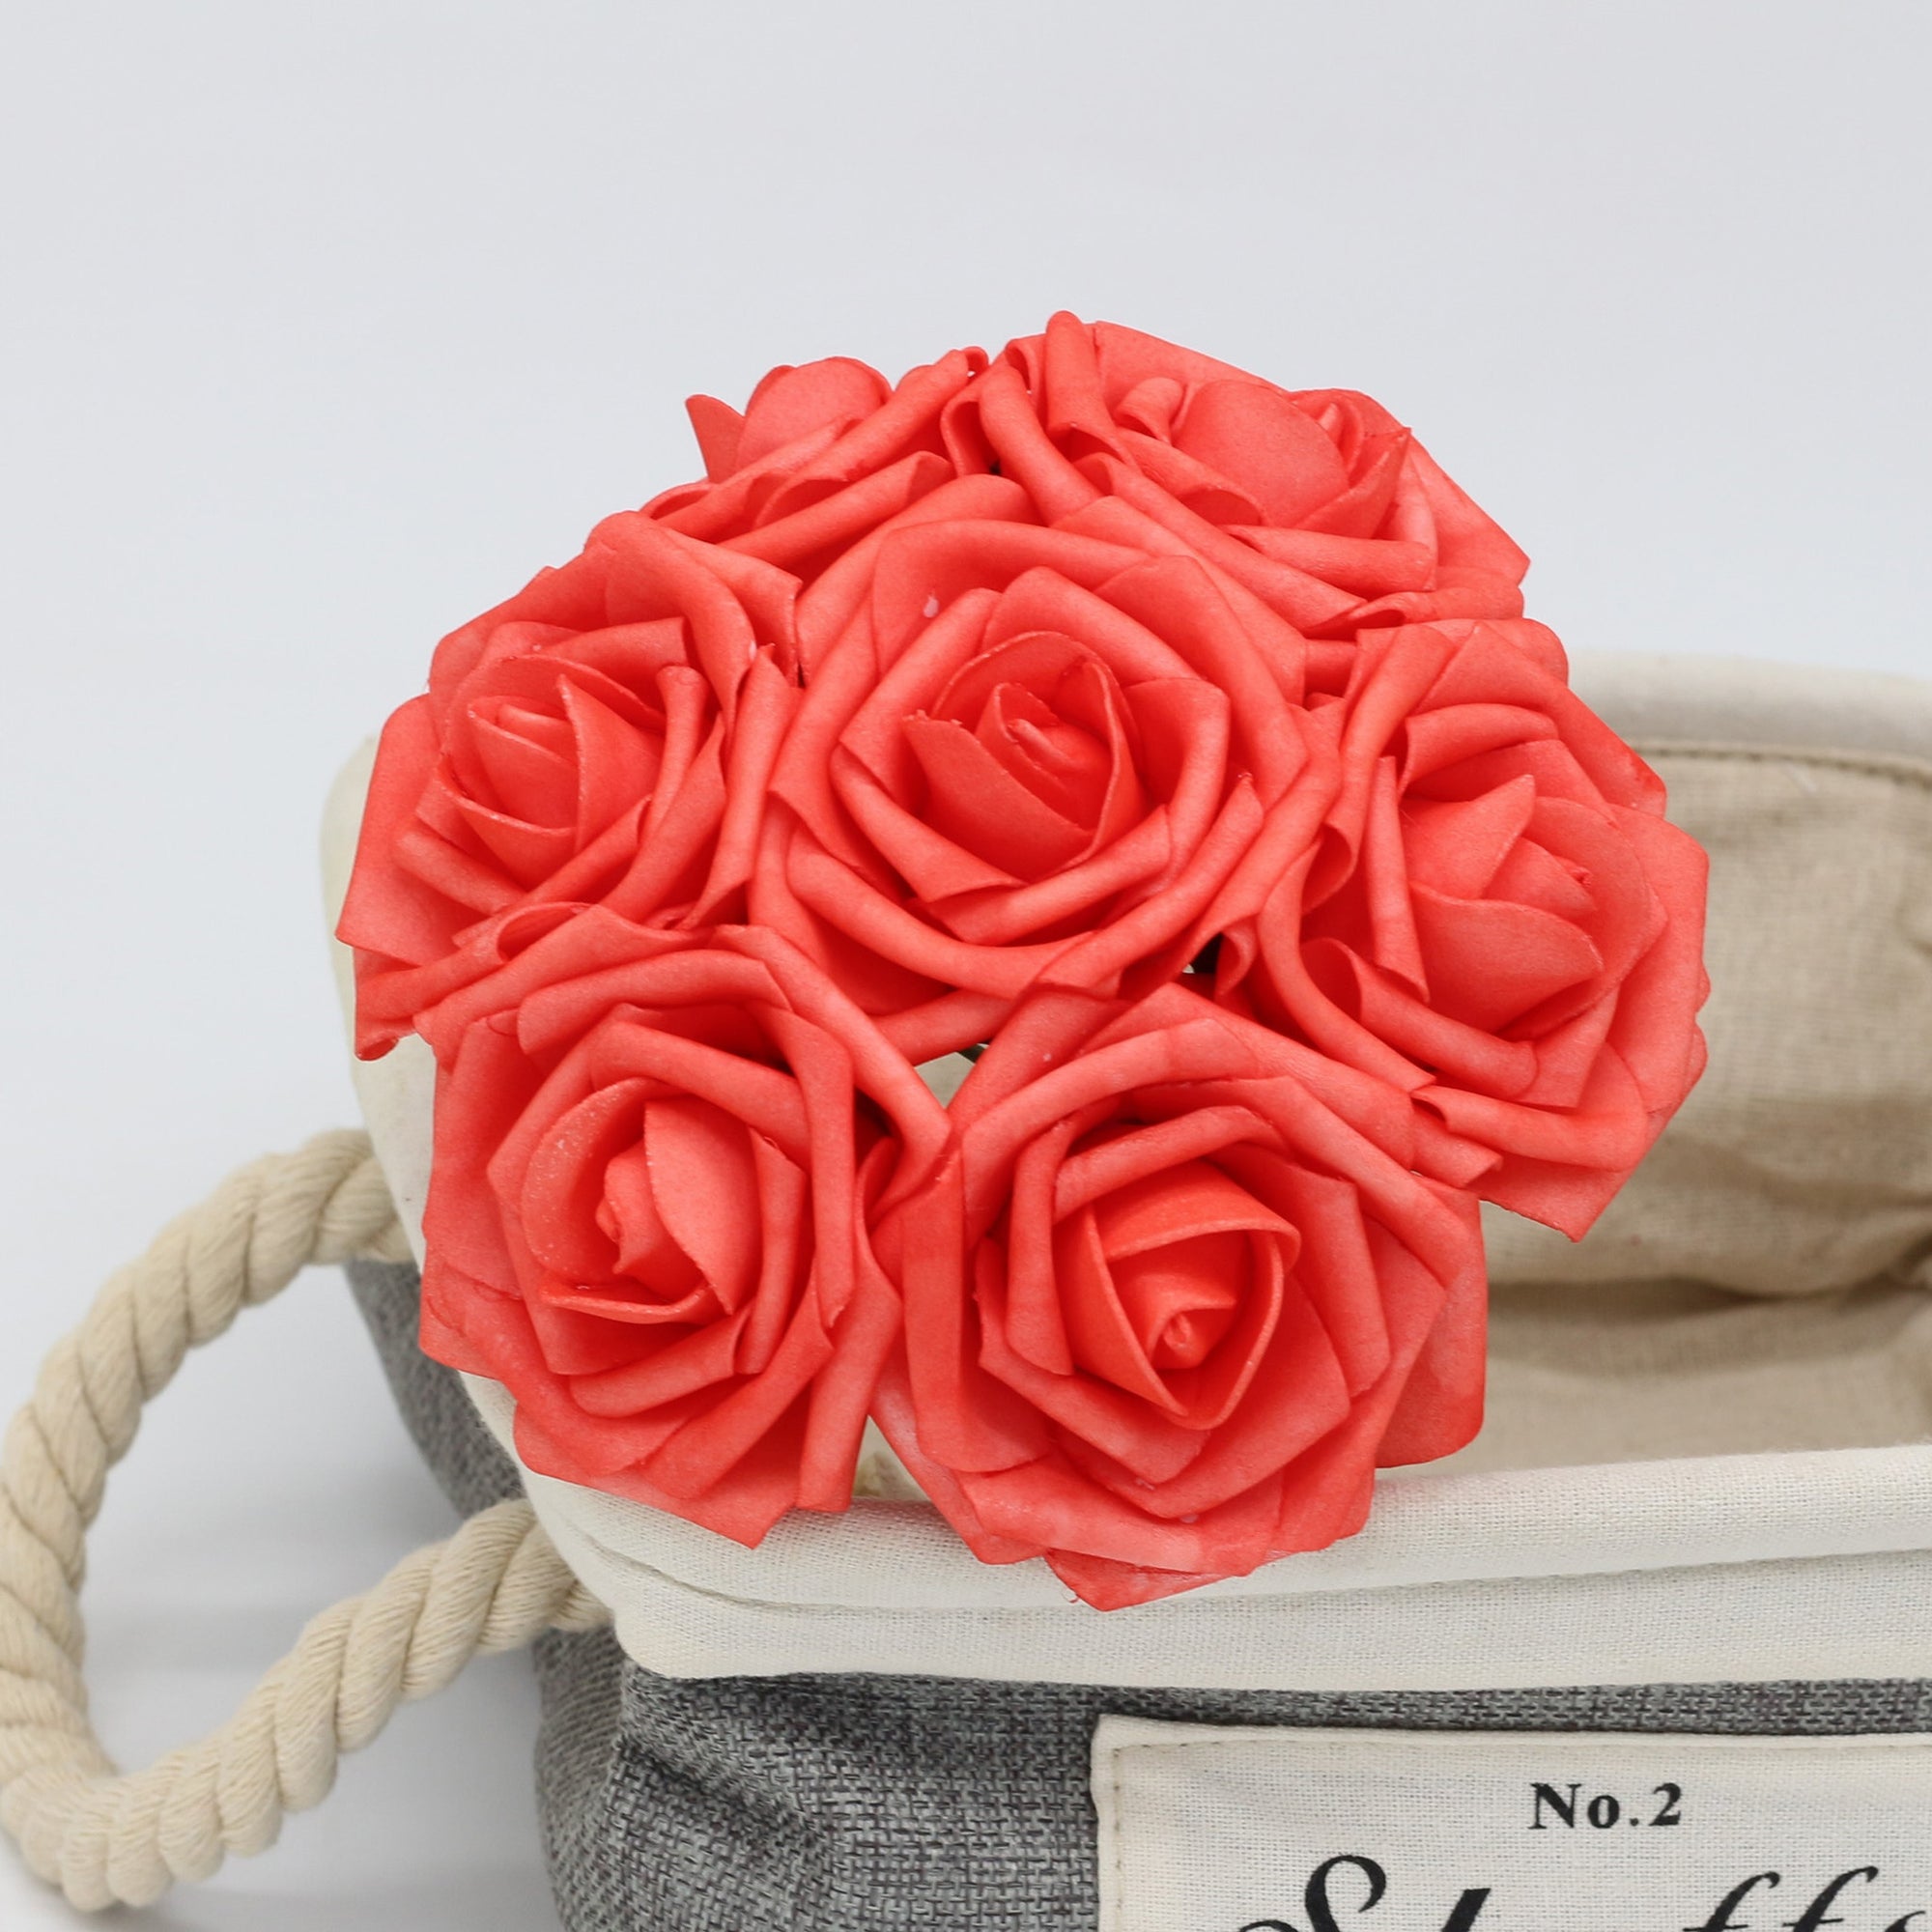 50 Coral Roses Wedding Flowers Wholesale for Wedding